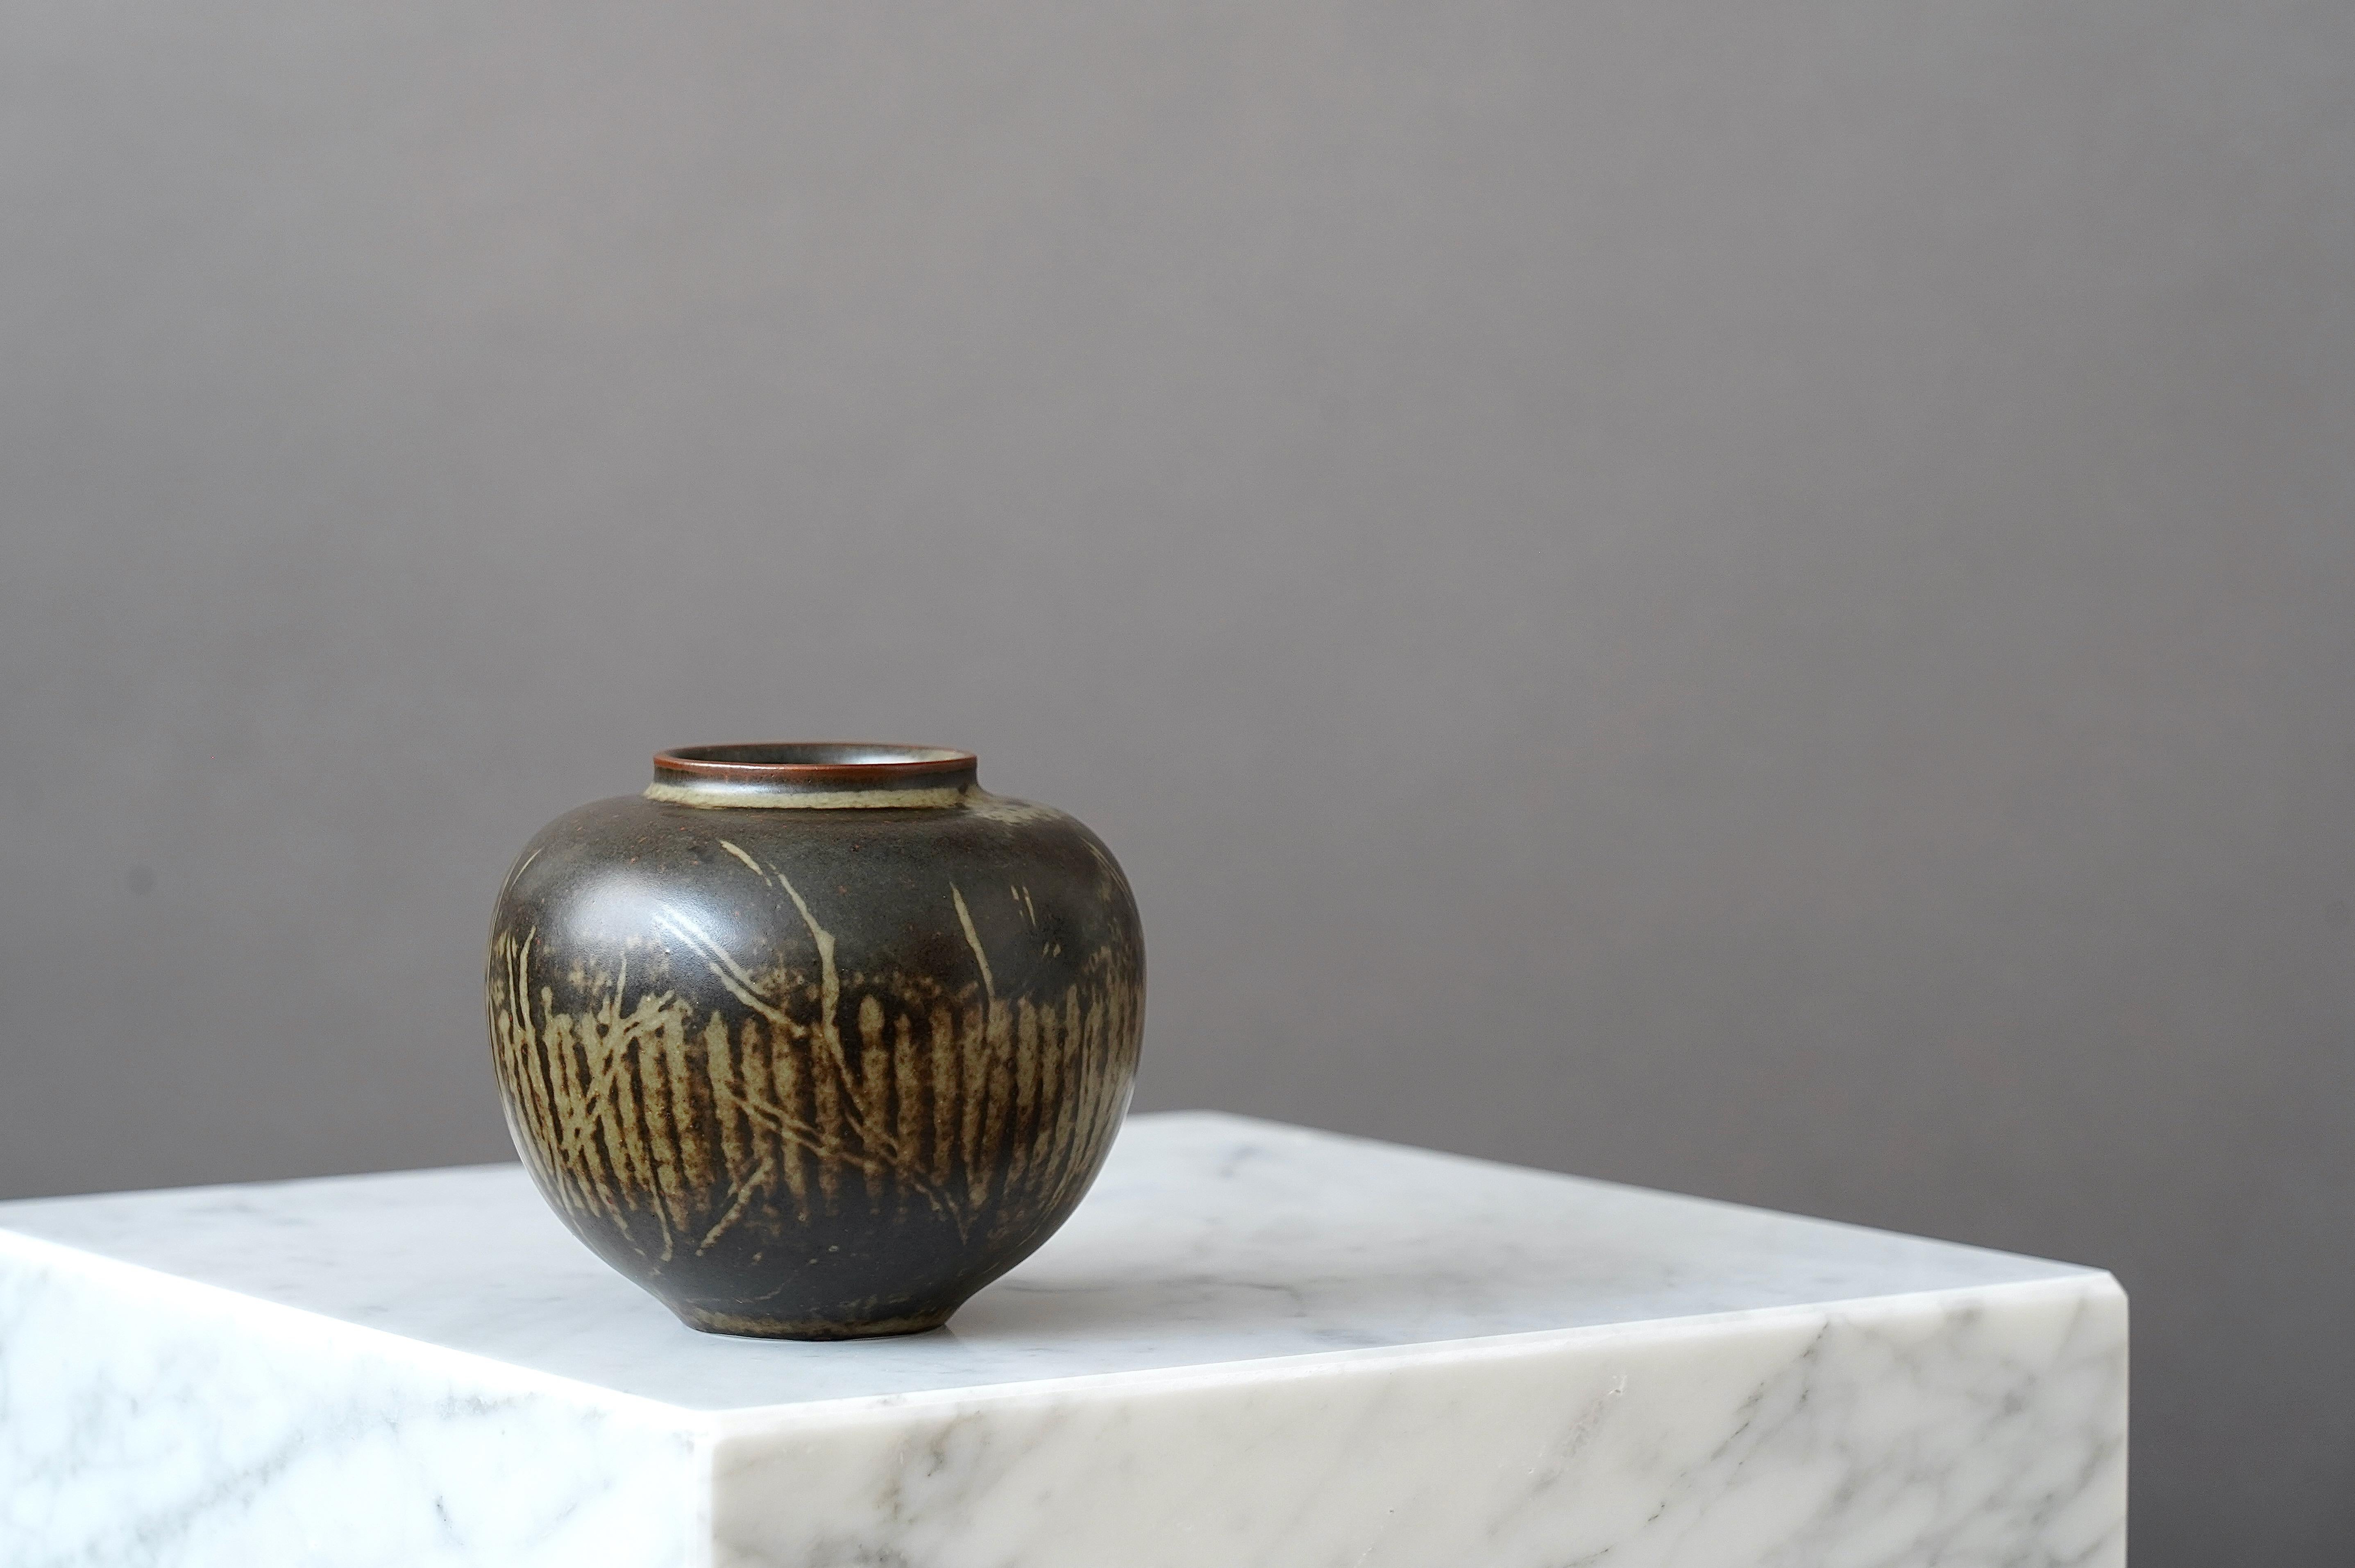 A beautiful stoneware vase with amazing sung glaze.
Made by Gerd Bogelund for Royal Copenhagen, Denmark.

Excellent condition. Painted monogram signature 